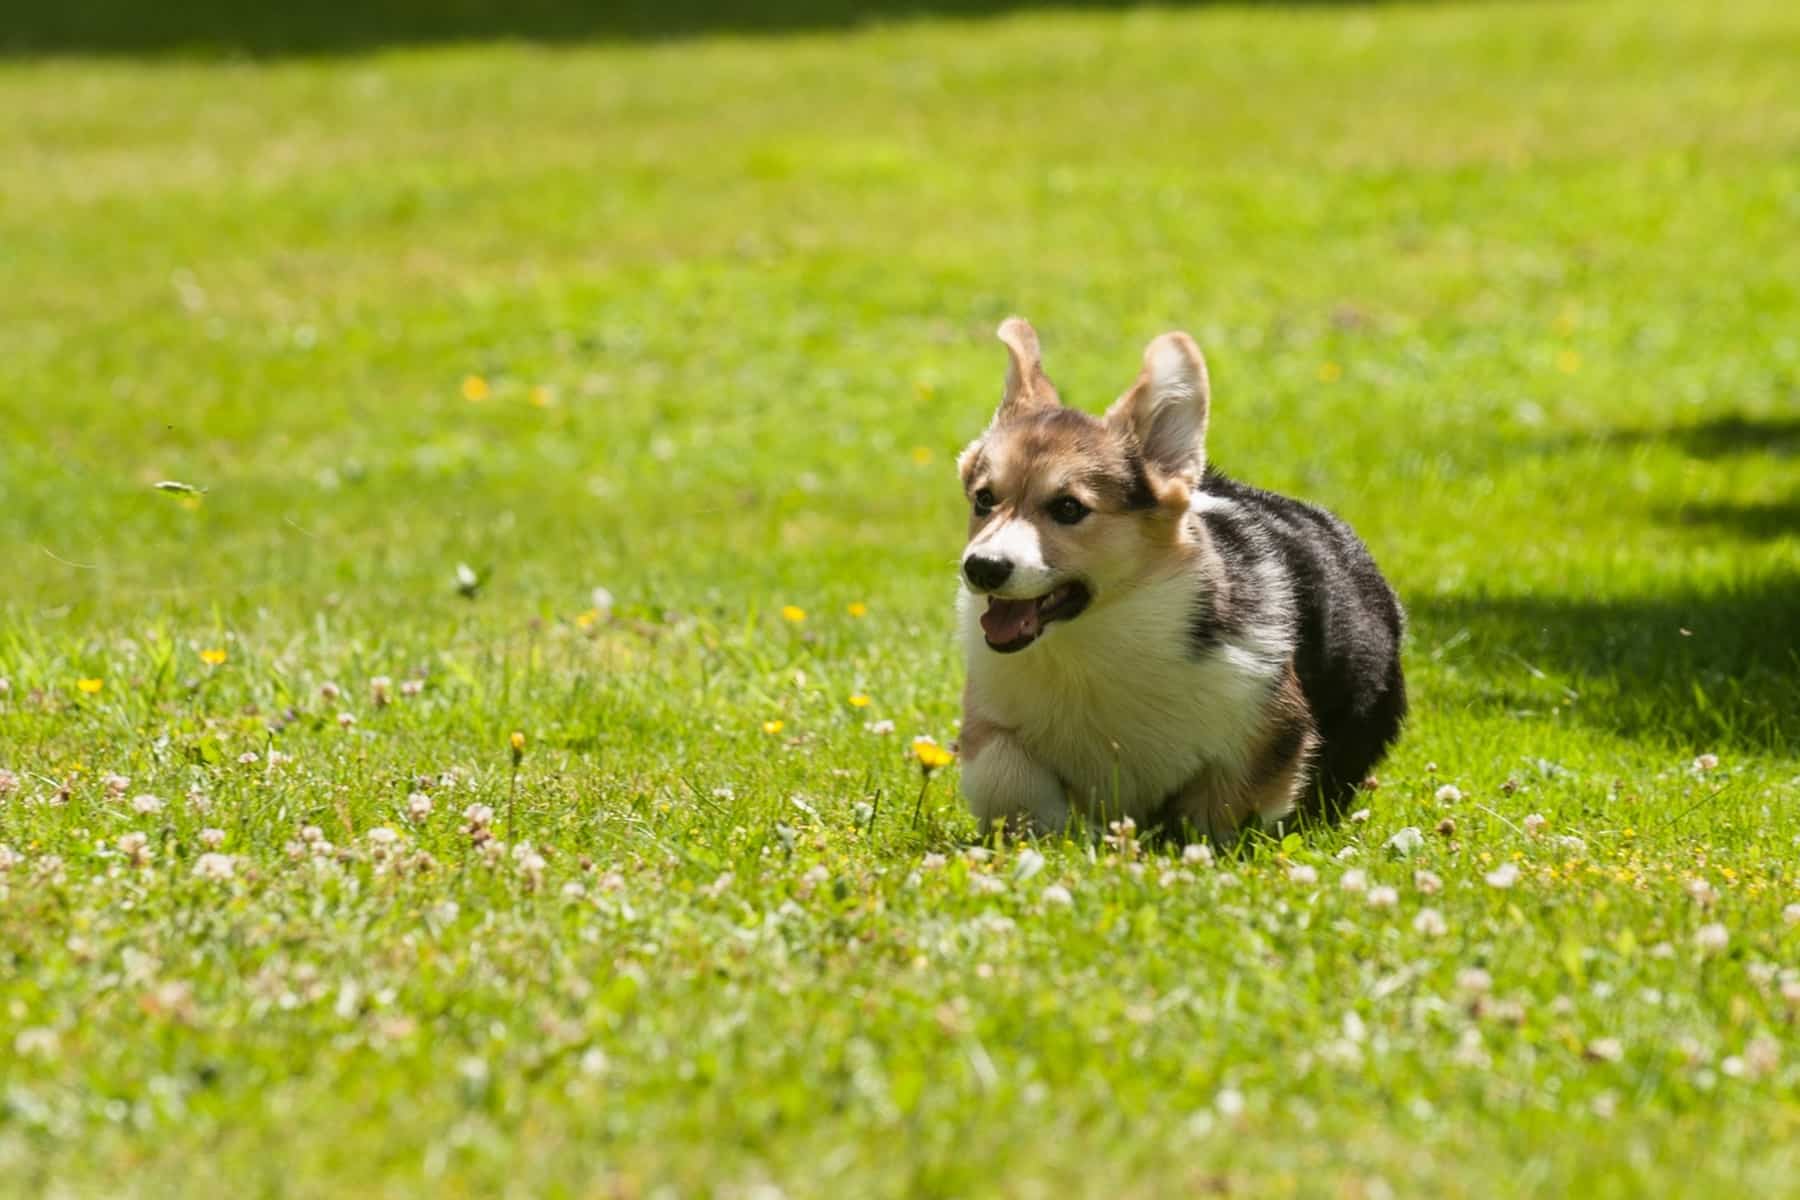 How Much Exercise Do Corgis Need? This corgi is happy running outside in the backyard.